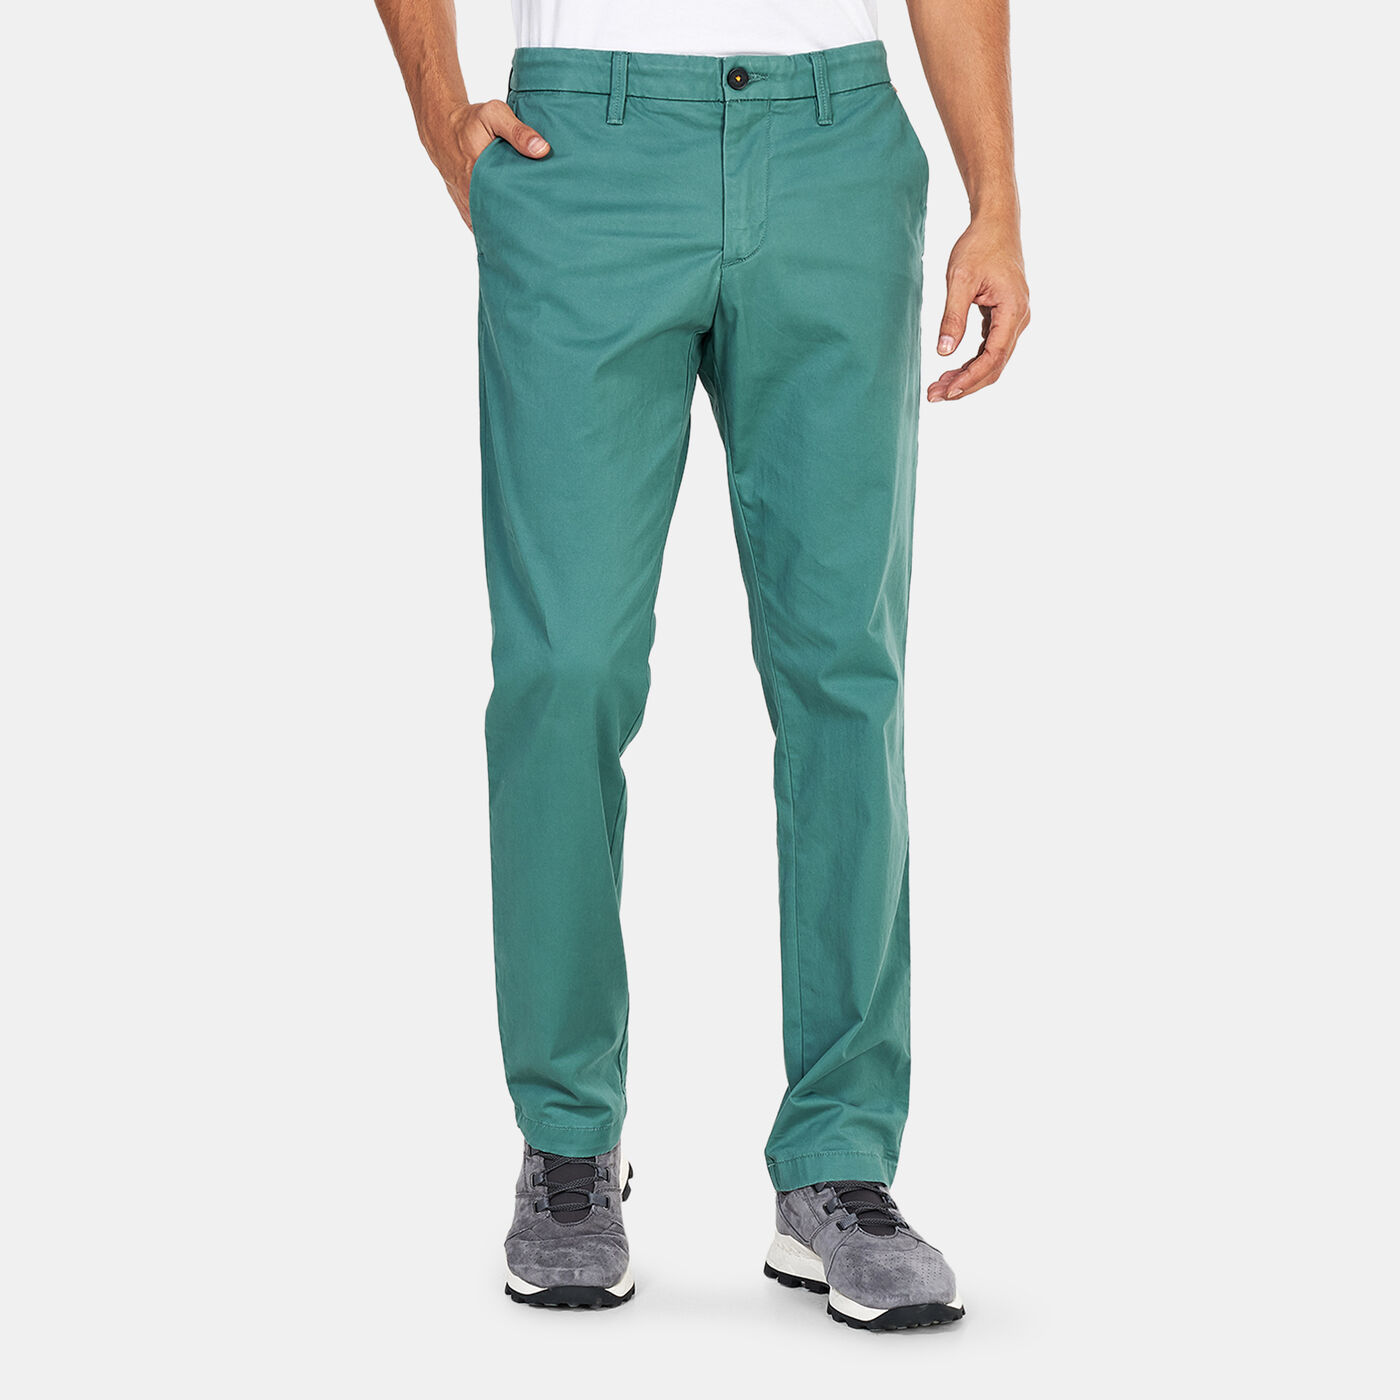 Men's Sargent Lake Stretch Twill Chino Pants